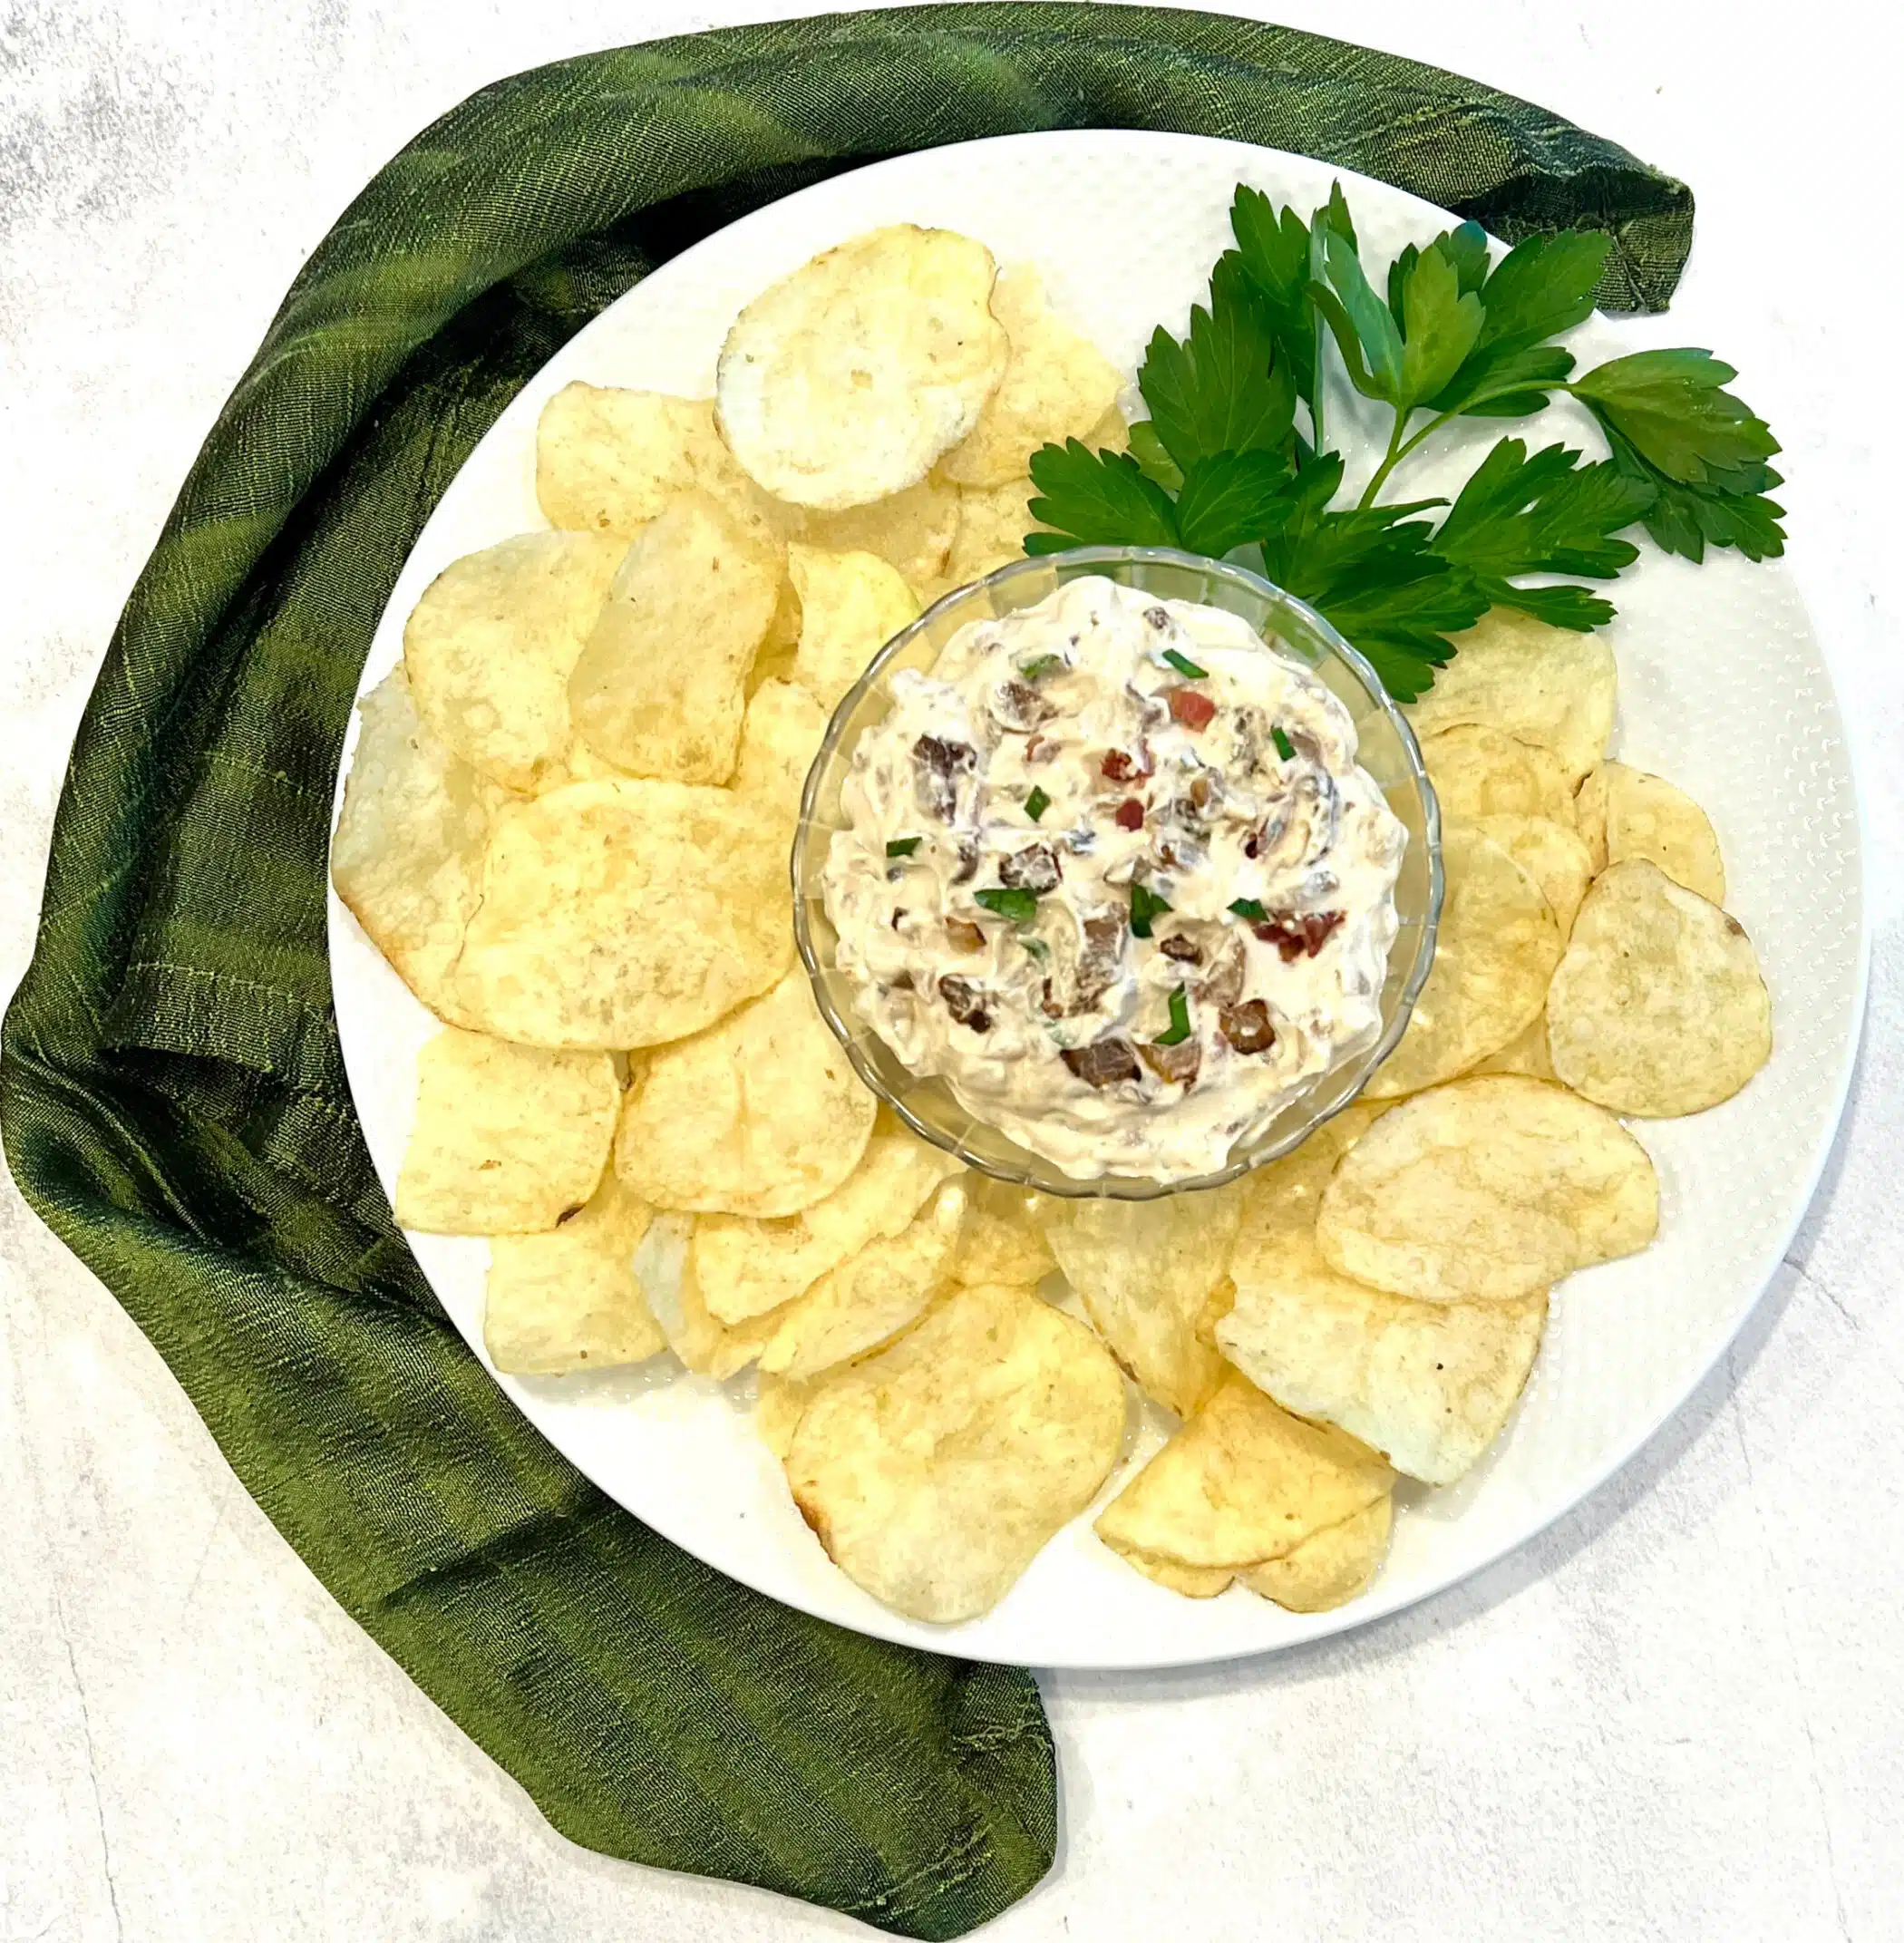 caramelized onion dip in a bowl with potato chips